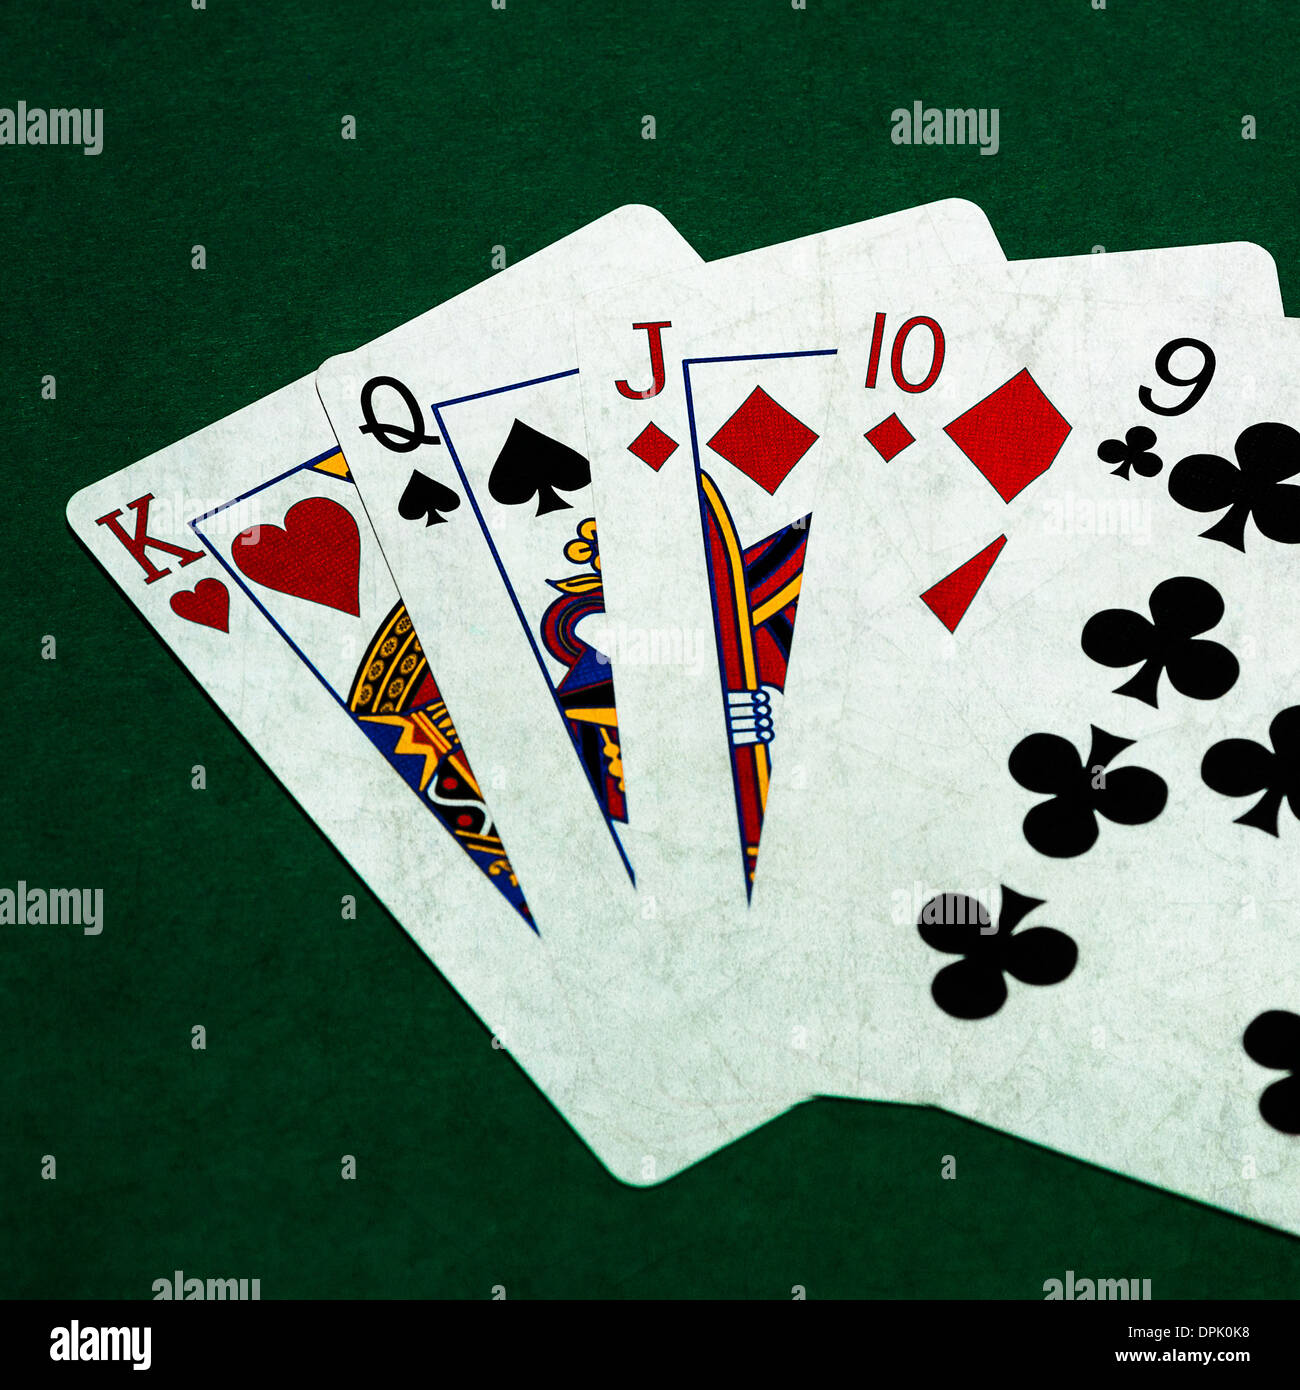 Amateurs poker variations But Overlook A Few Simple Things